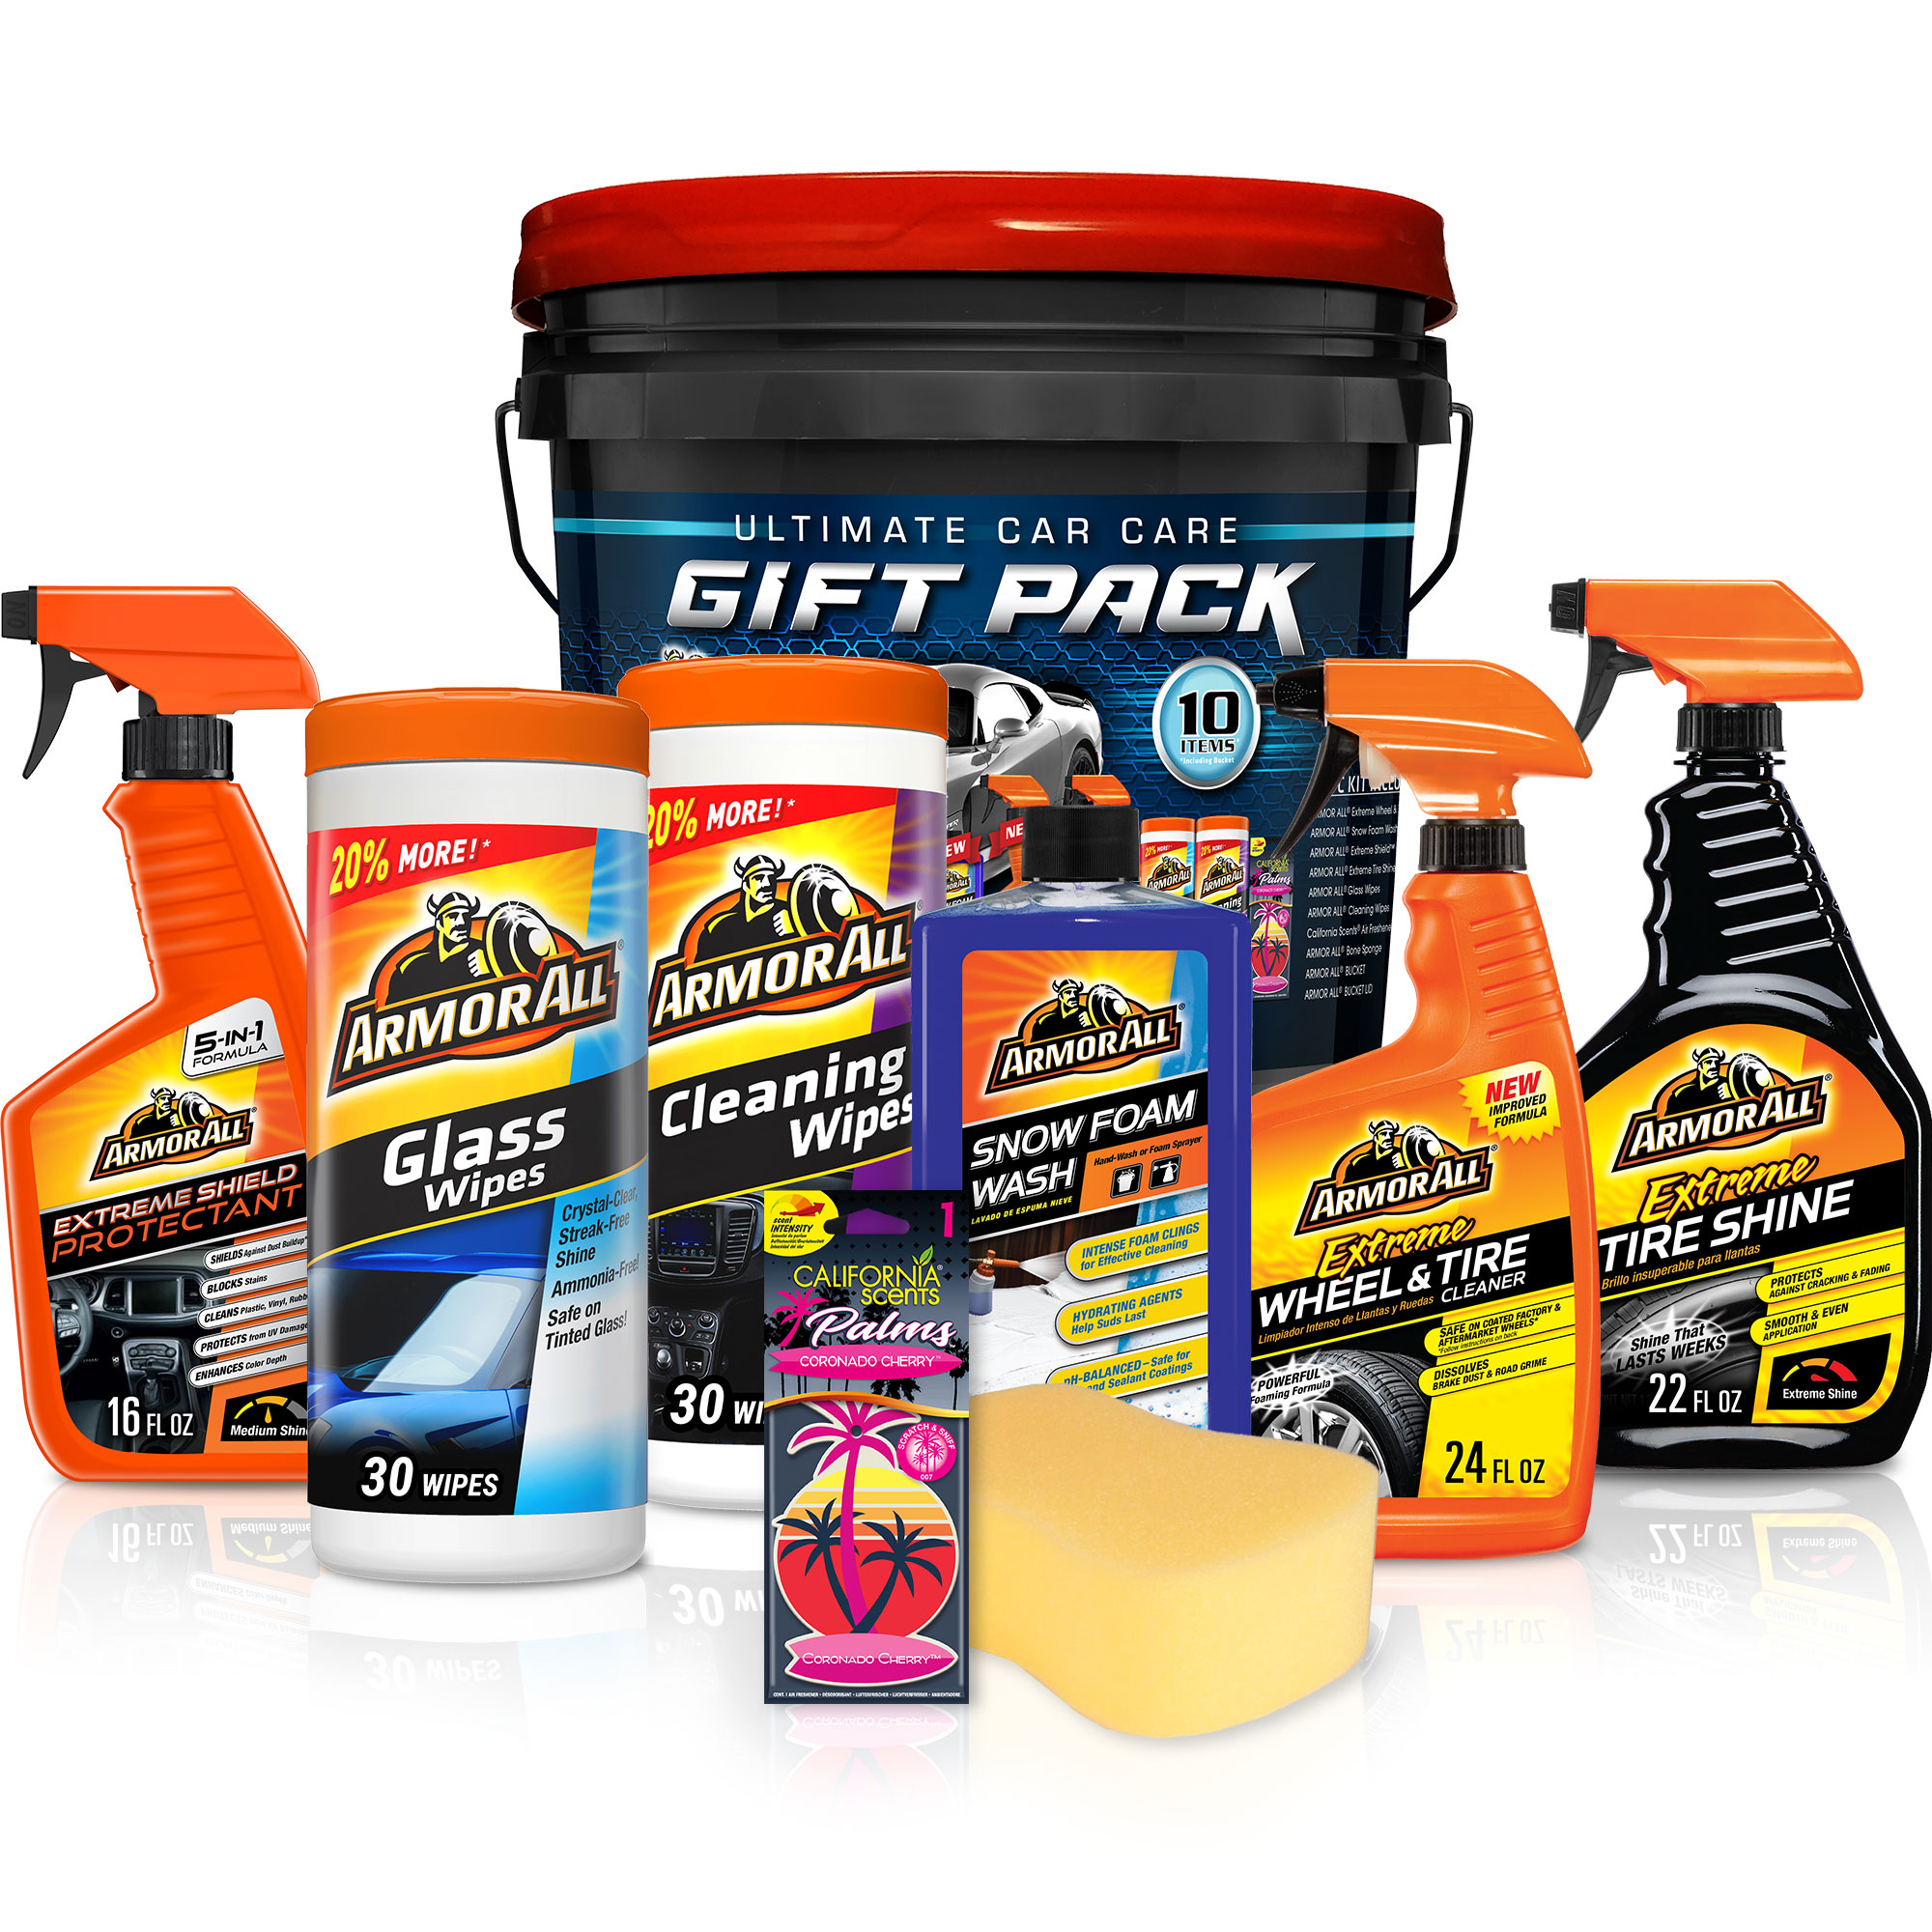 Armor All Ultimate Car Care Holiday Gift Bucket (10 Pieces) - image 2 of 10